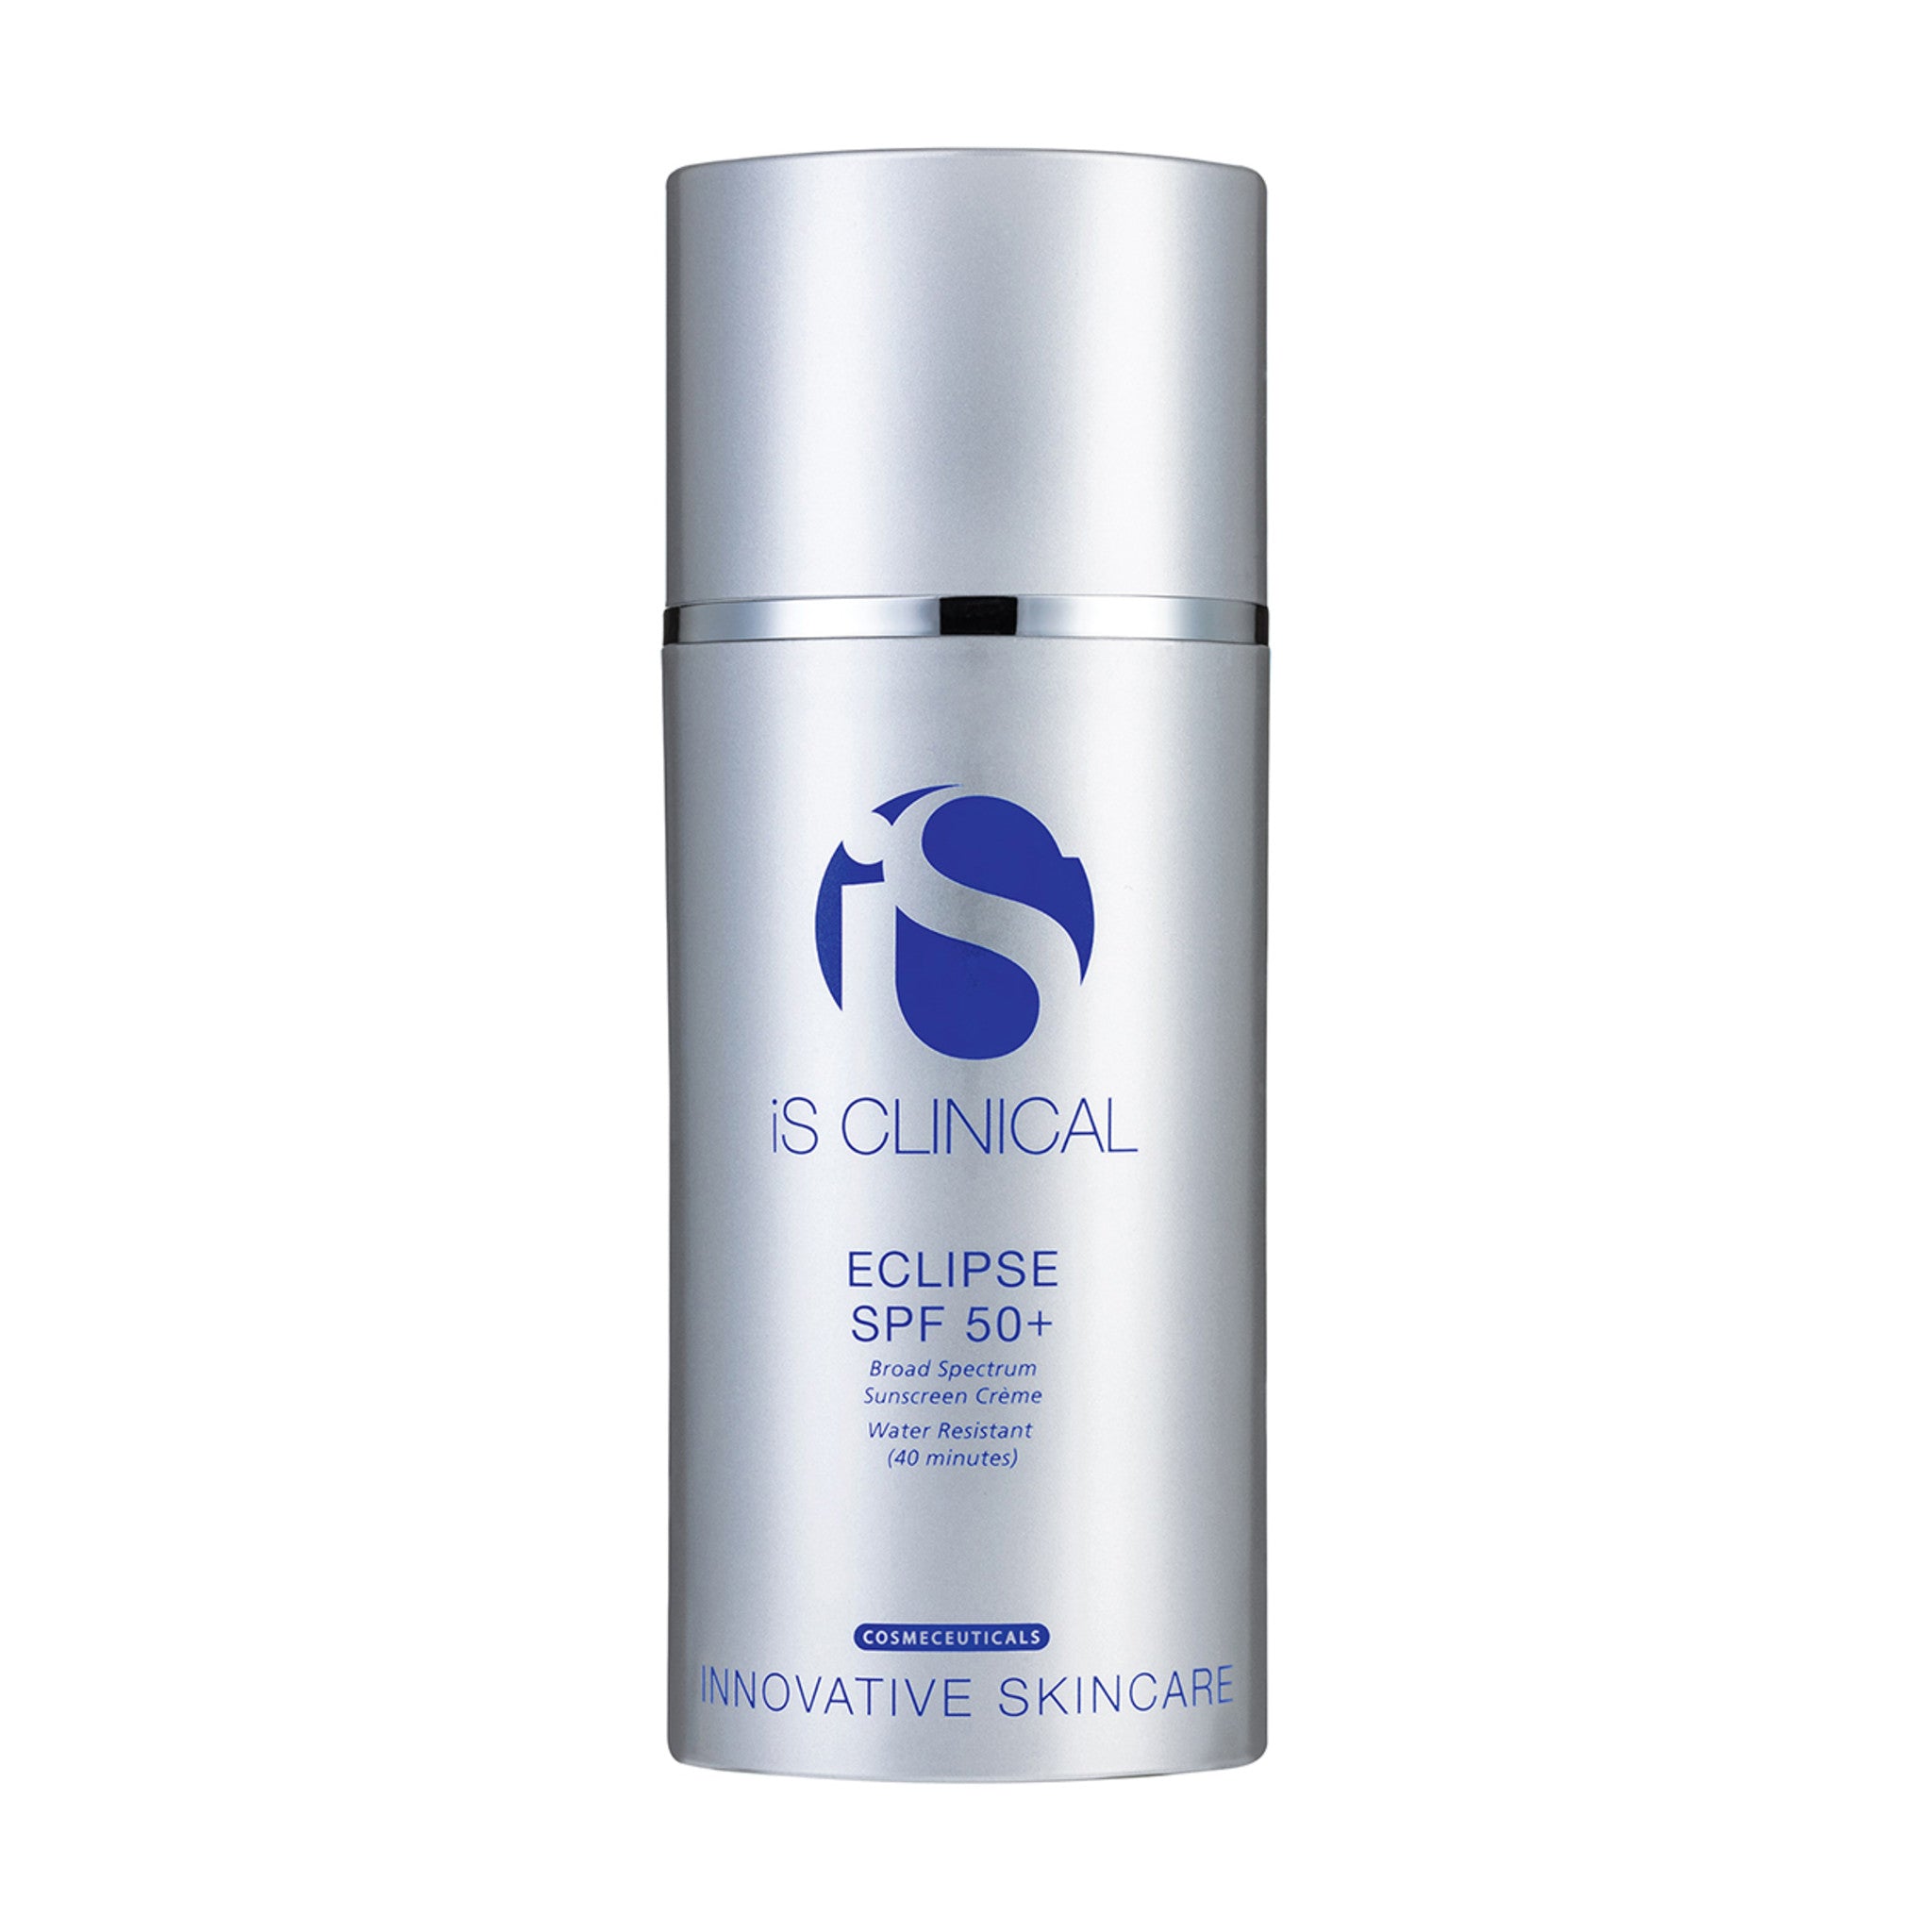 IS Clinical Eclipse SPF 50+ main image.